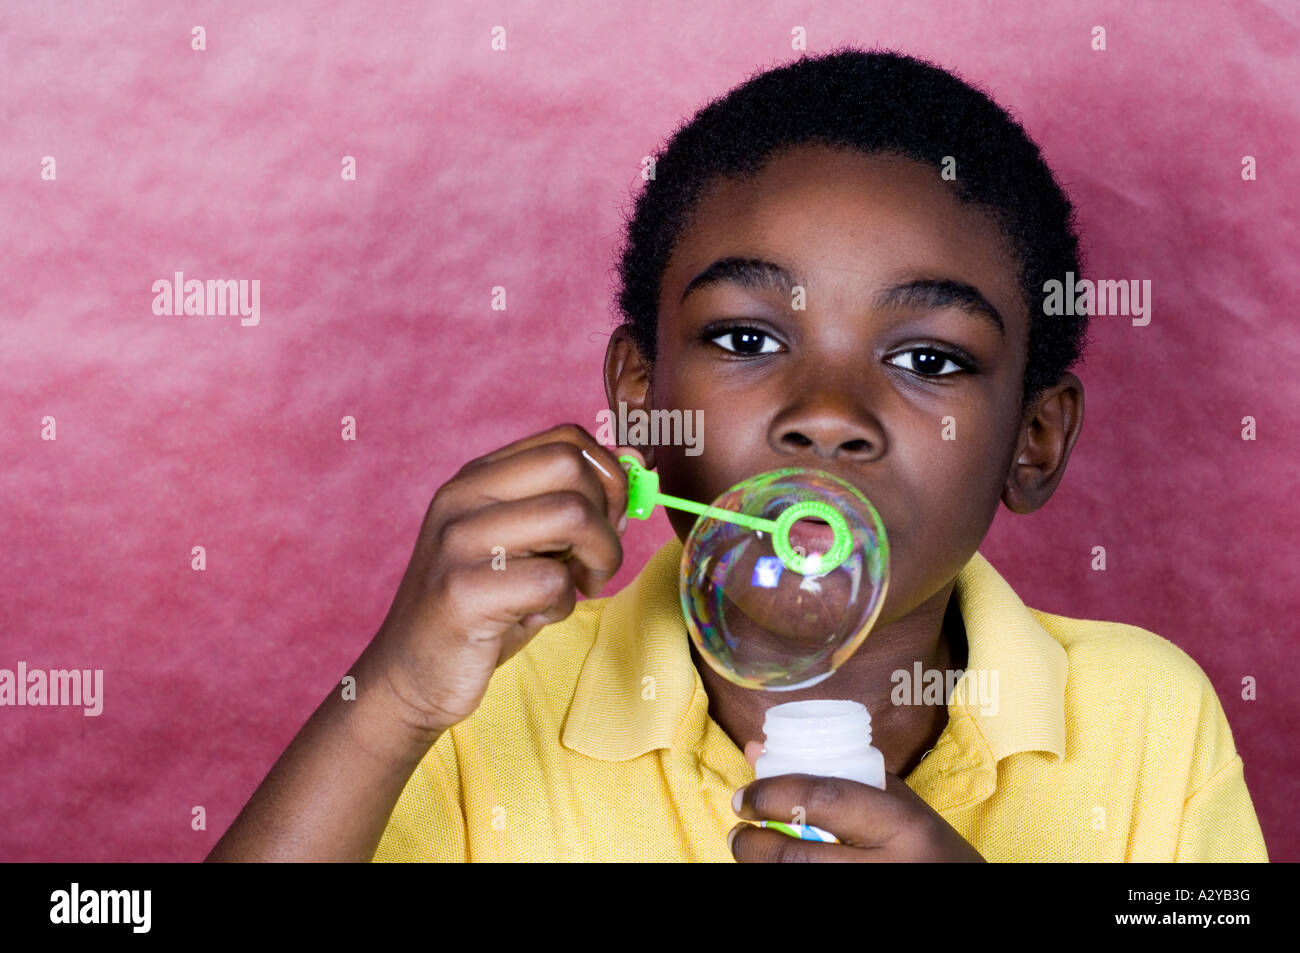 Boy looking at camera while blowing a bubble Stock Photo